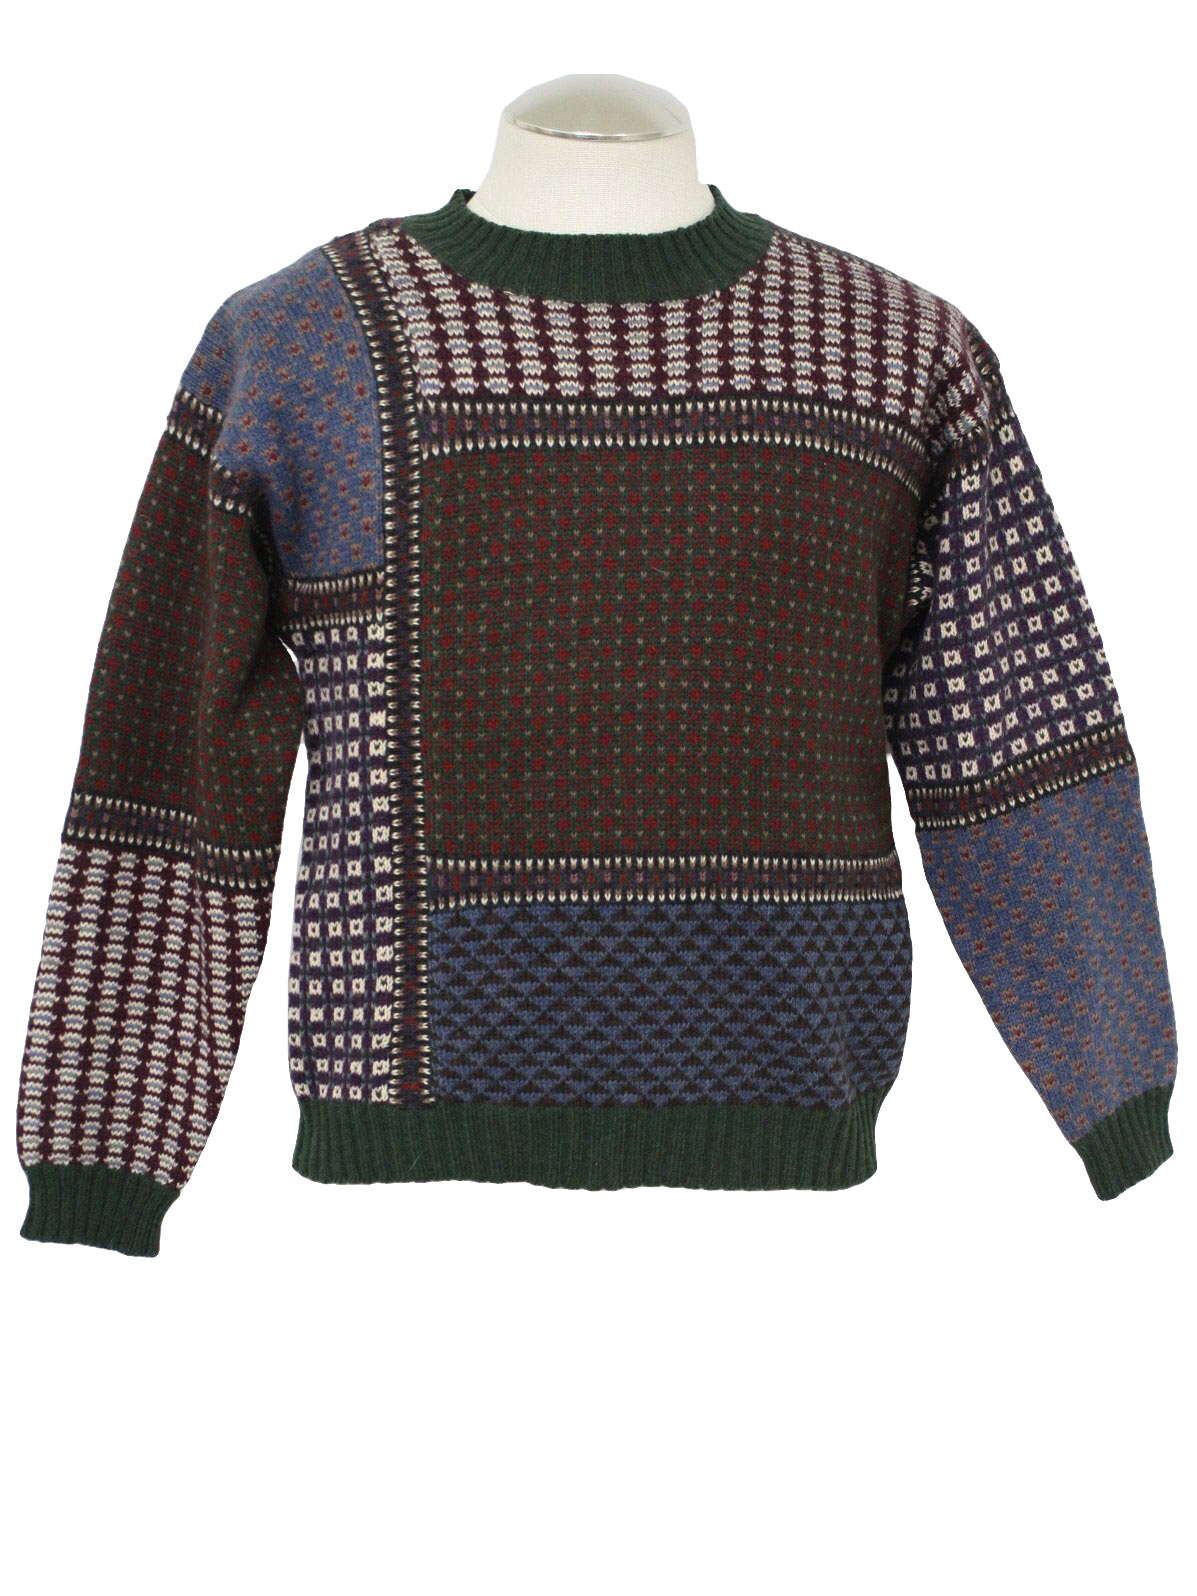 Retro 80s Sweater (Woolrich) : 80s -Woolrich- Mens green, maroon, red ...